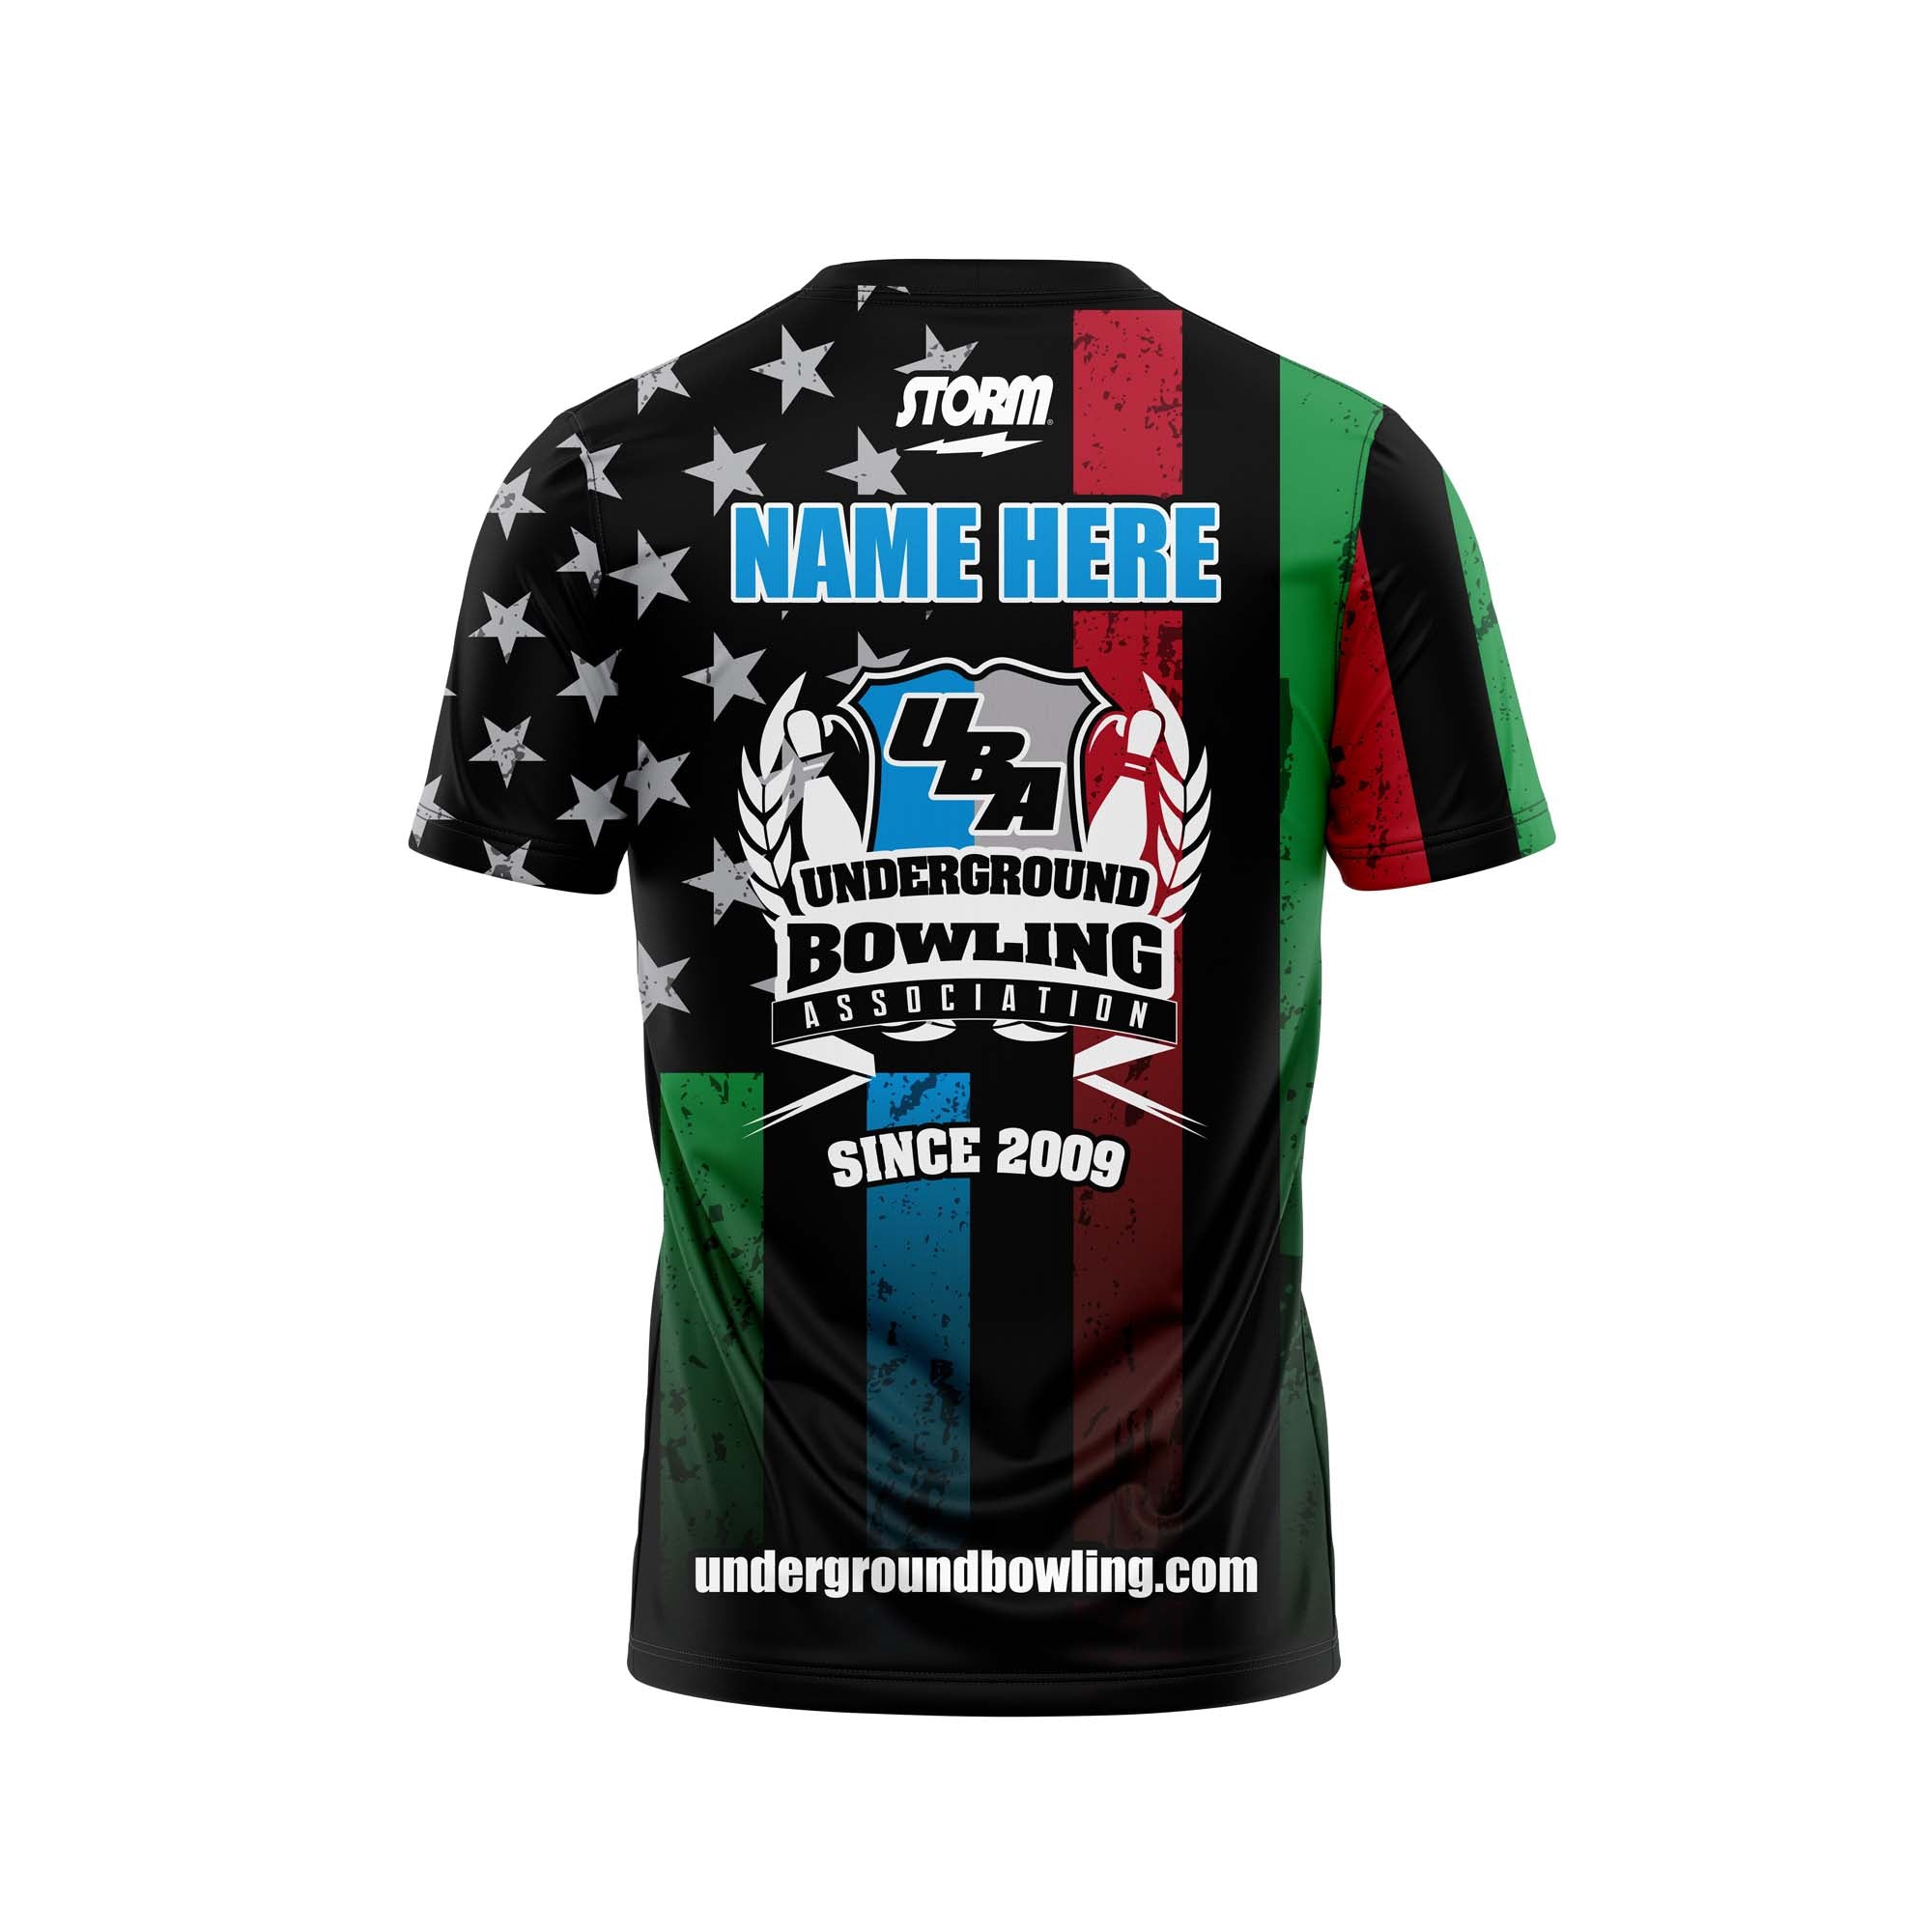 Insurgents First Responders Jersey